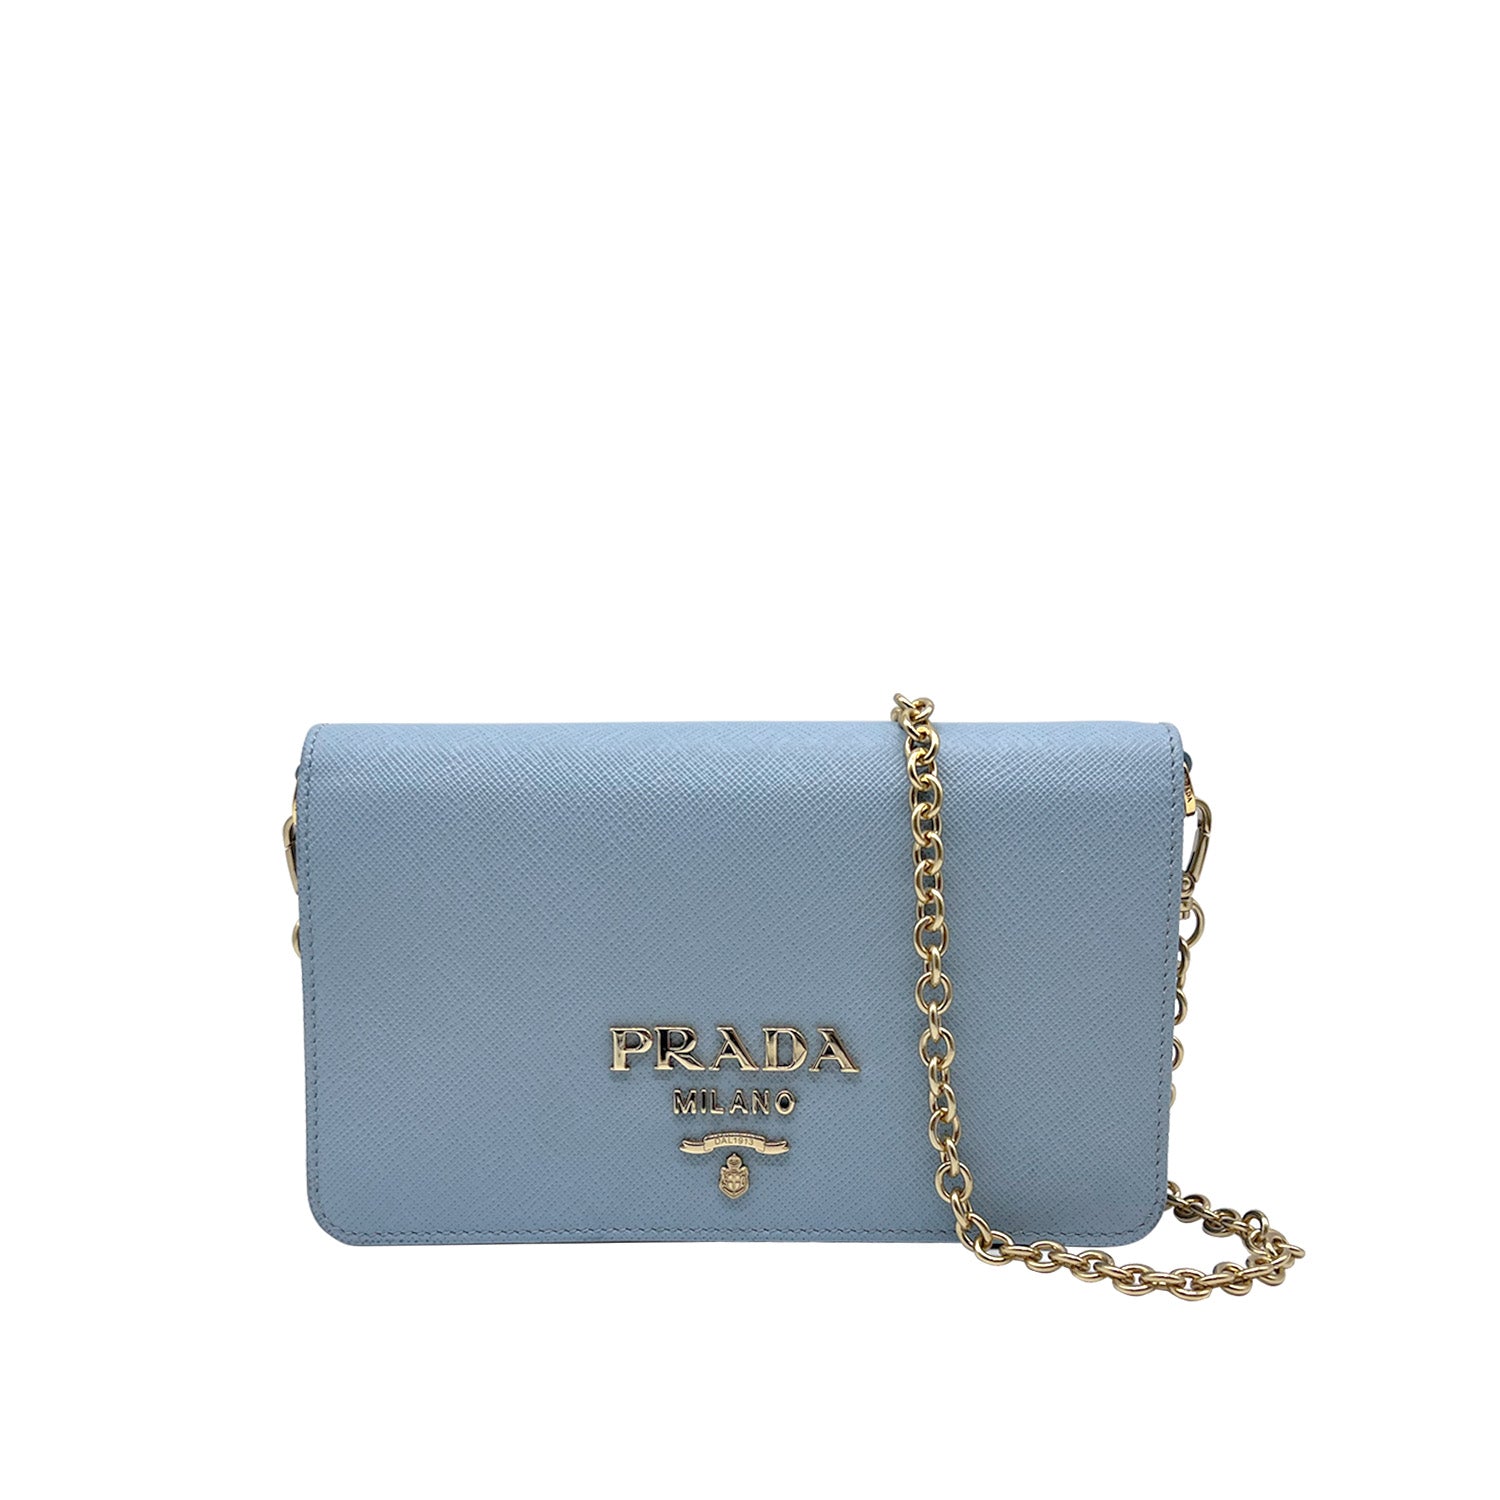 Prada Baby Blue Saffiano Leather Micro Bag w/ Strap Prada Visit our store  online today! Stop by now